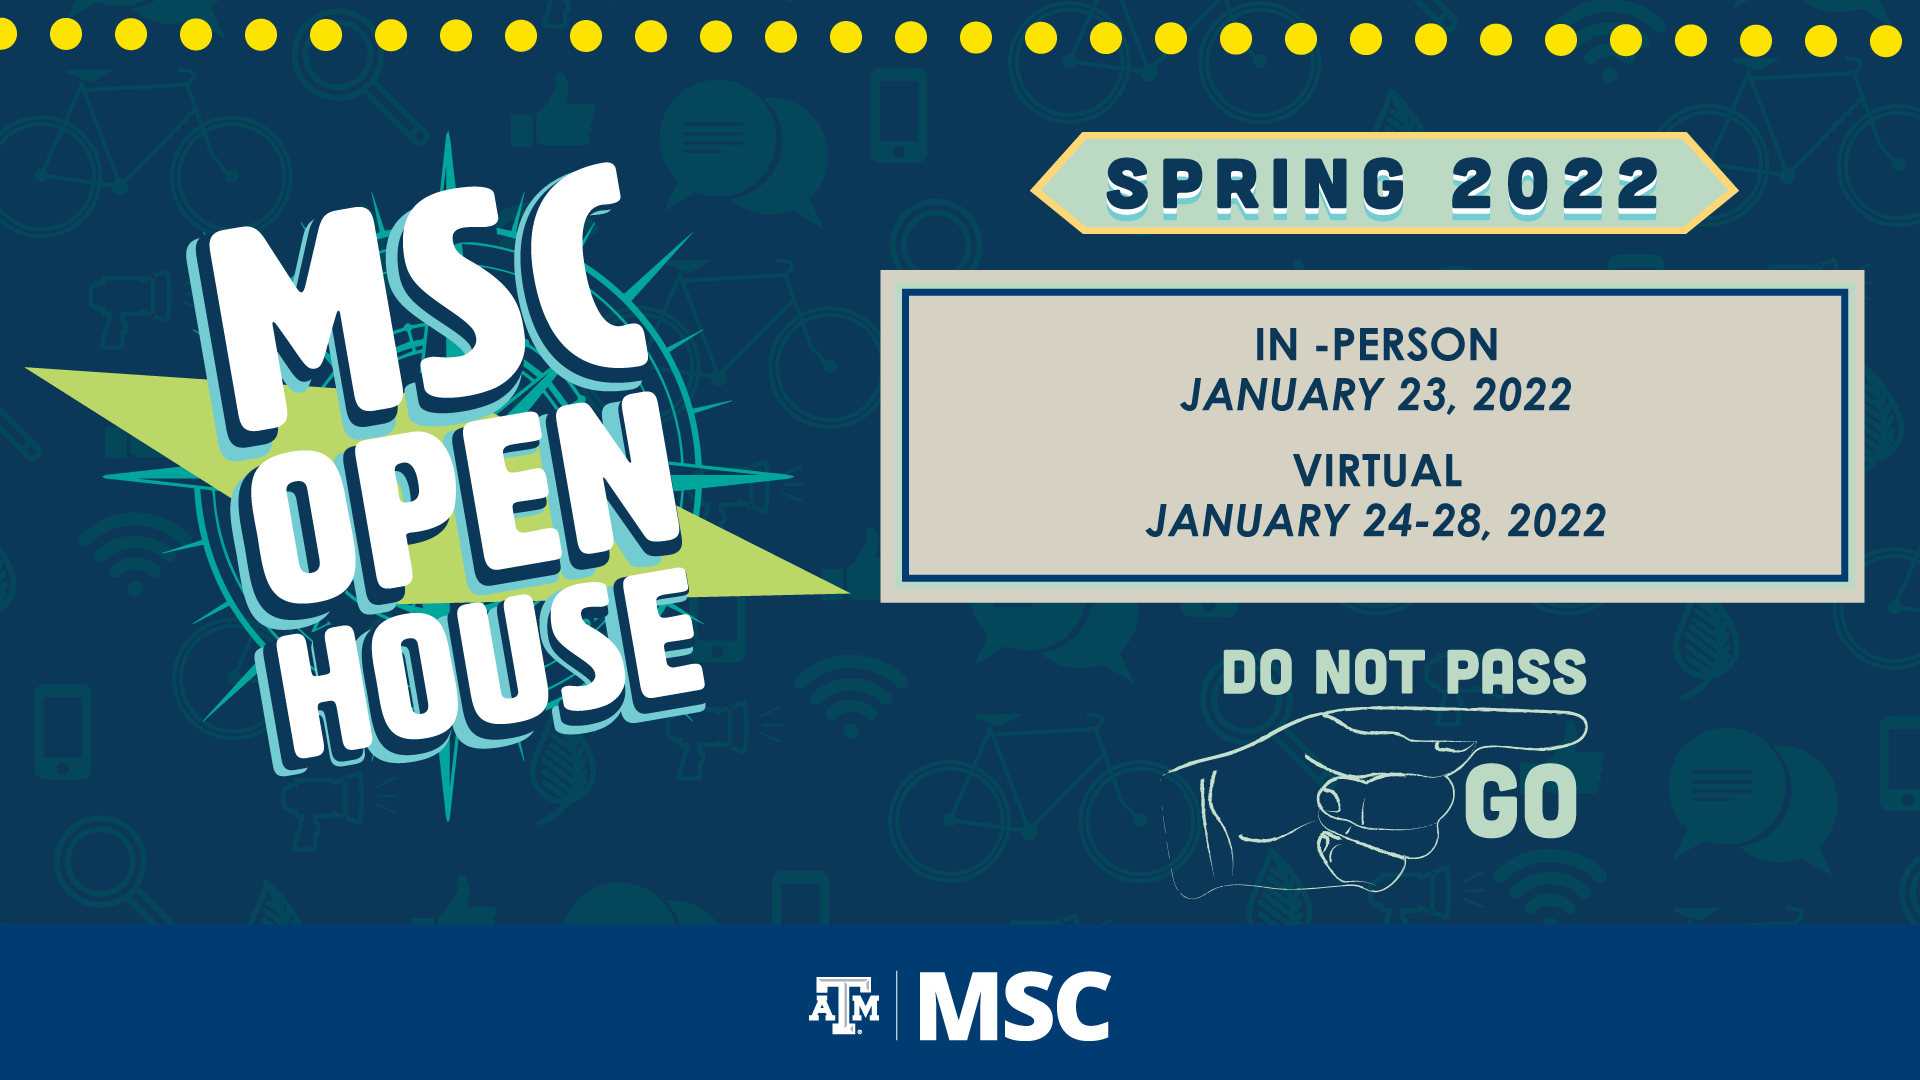 MSC OPEN HOUSE Spring 2022. In-Person: January 23, 2022. Virtual: January 24-28, 2022